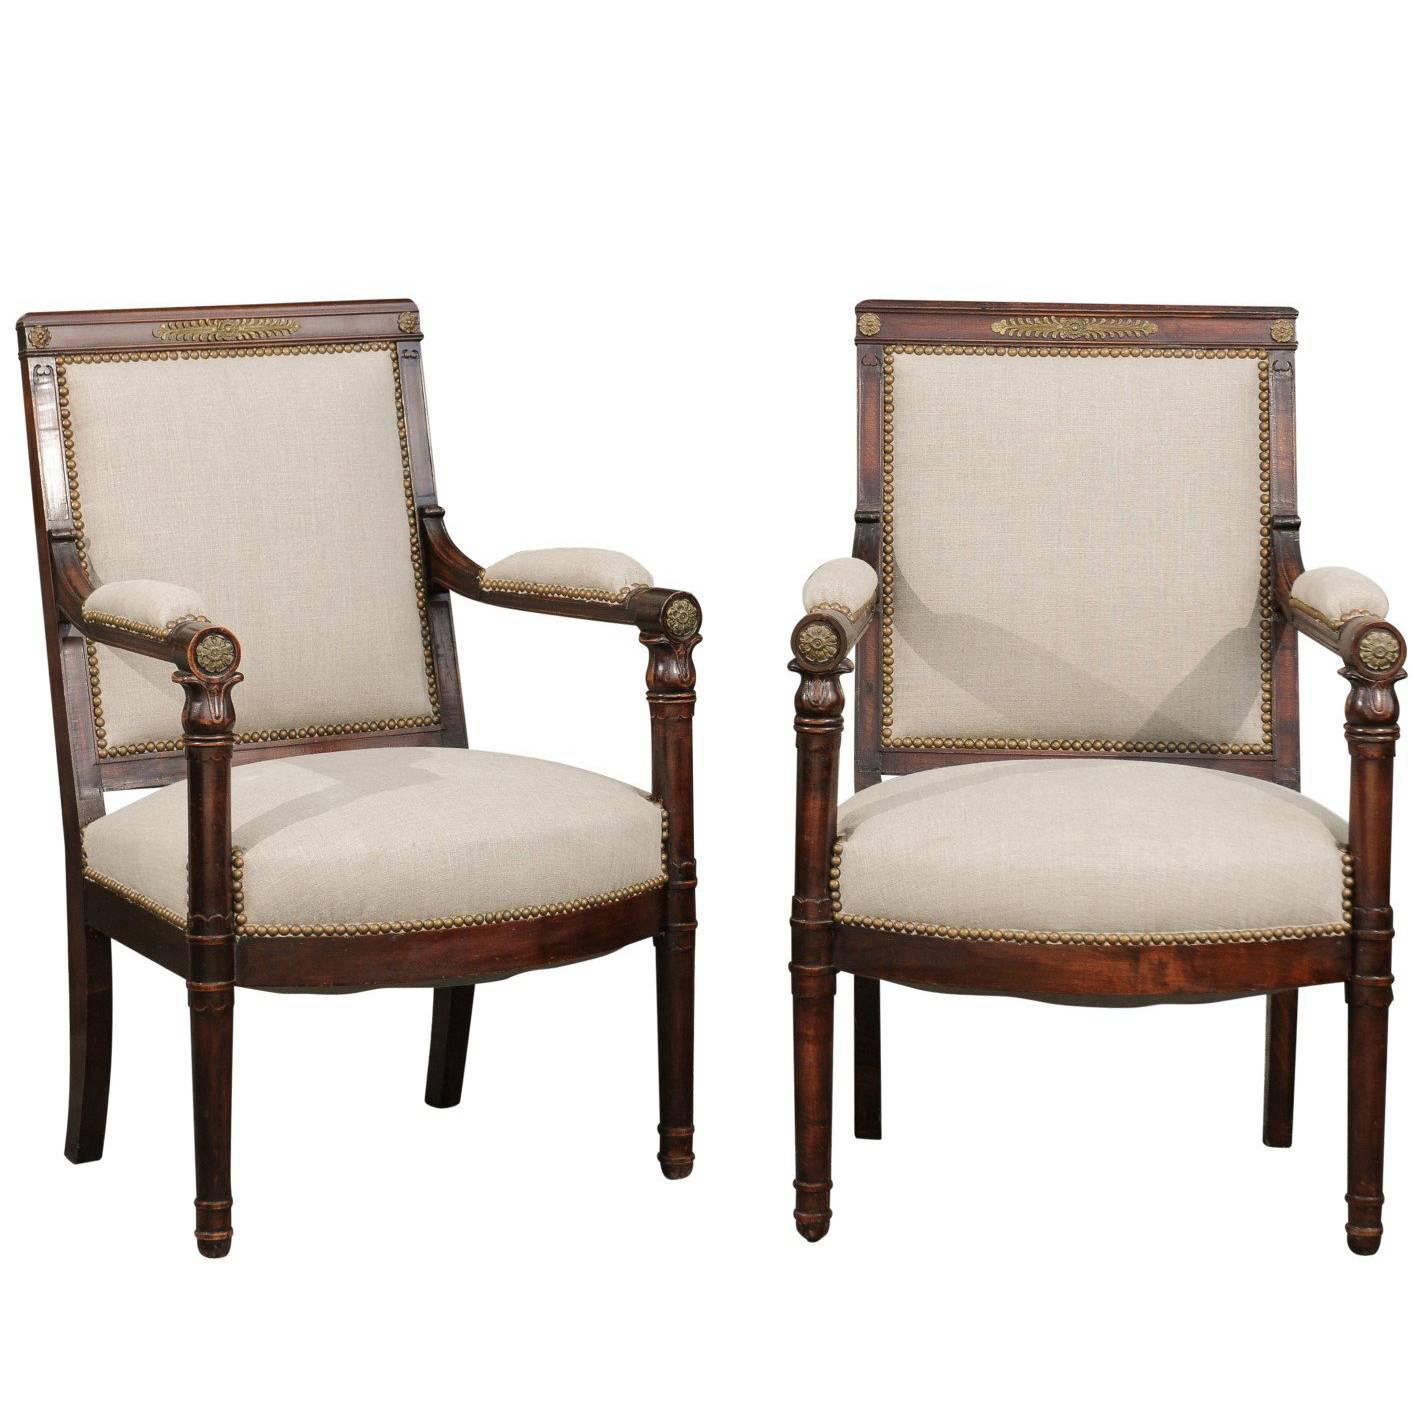 English 19th Century Empire Revival Upholstered Armchairs with Palmettes For Sale